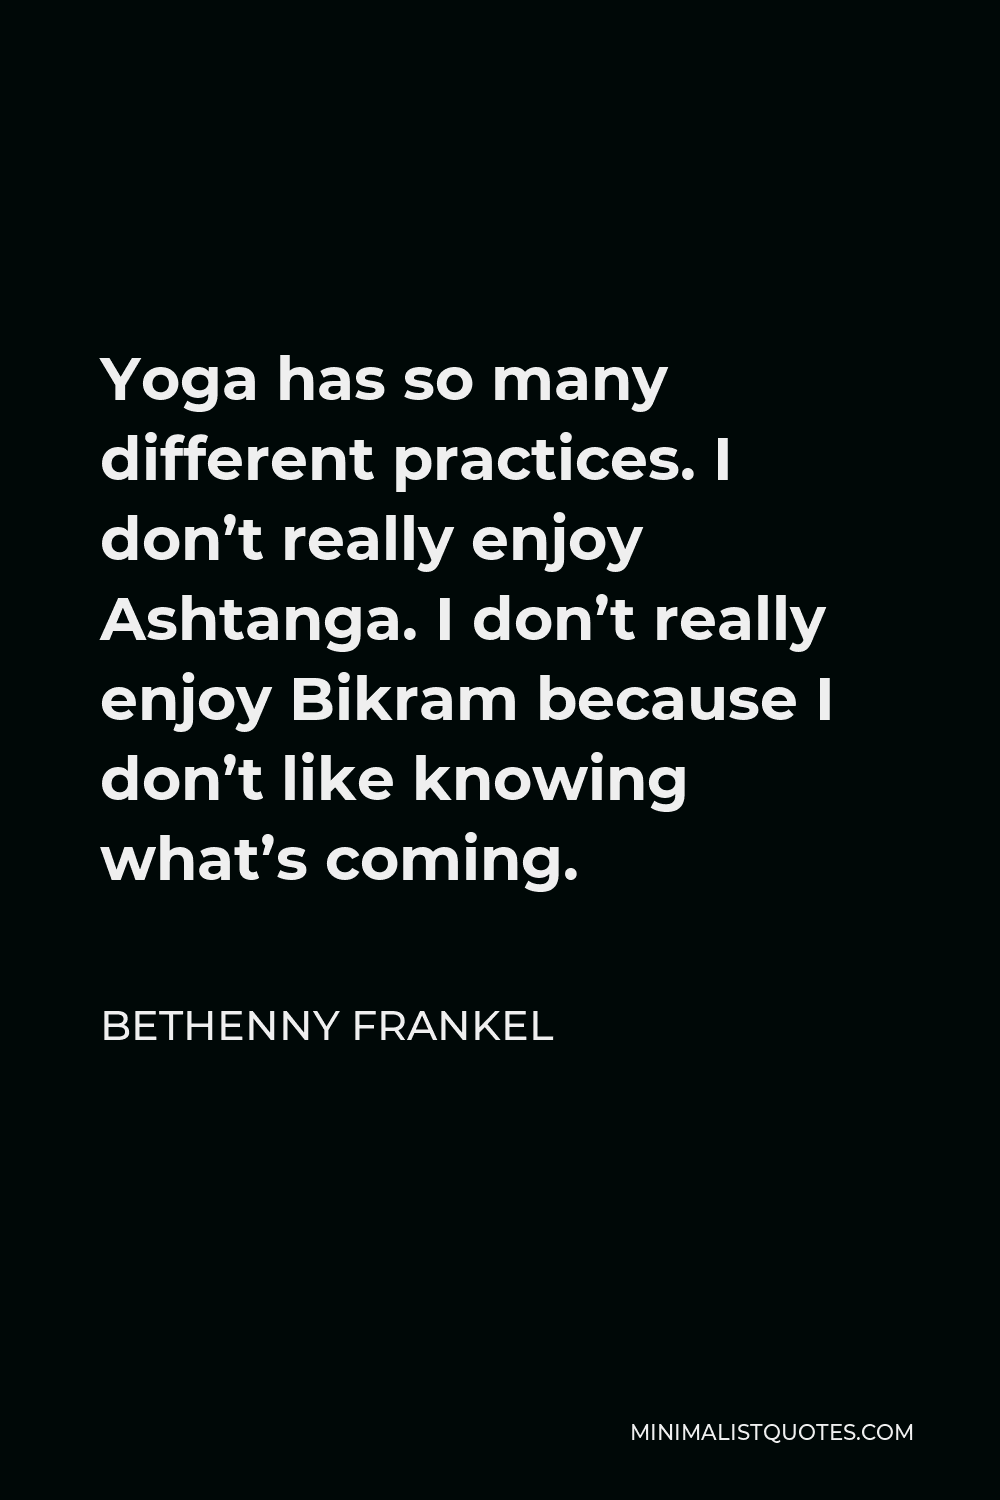 Bethenny Frankel Quote - Yoga has so many different practices. I don’t really enjoy Ashtanga. I don’t really enjoy Bikram because I don’t like knowing what’s coming.